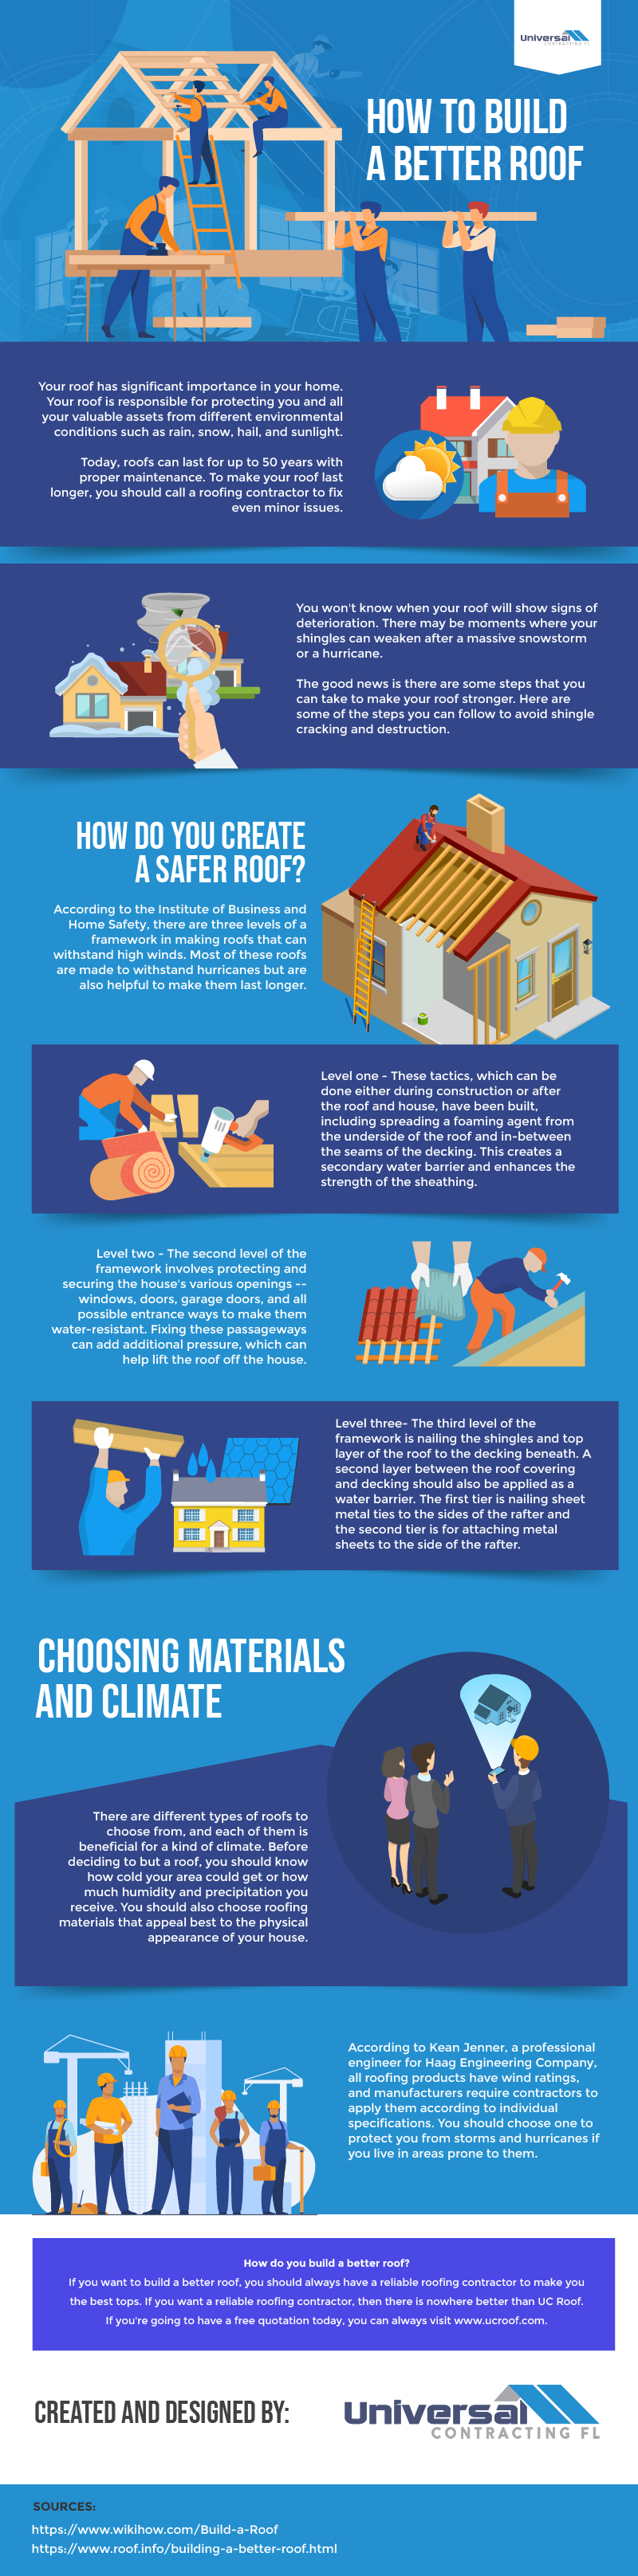 How to Build a Better Roof – Infographic